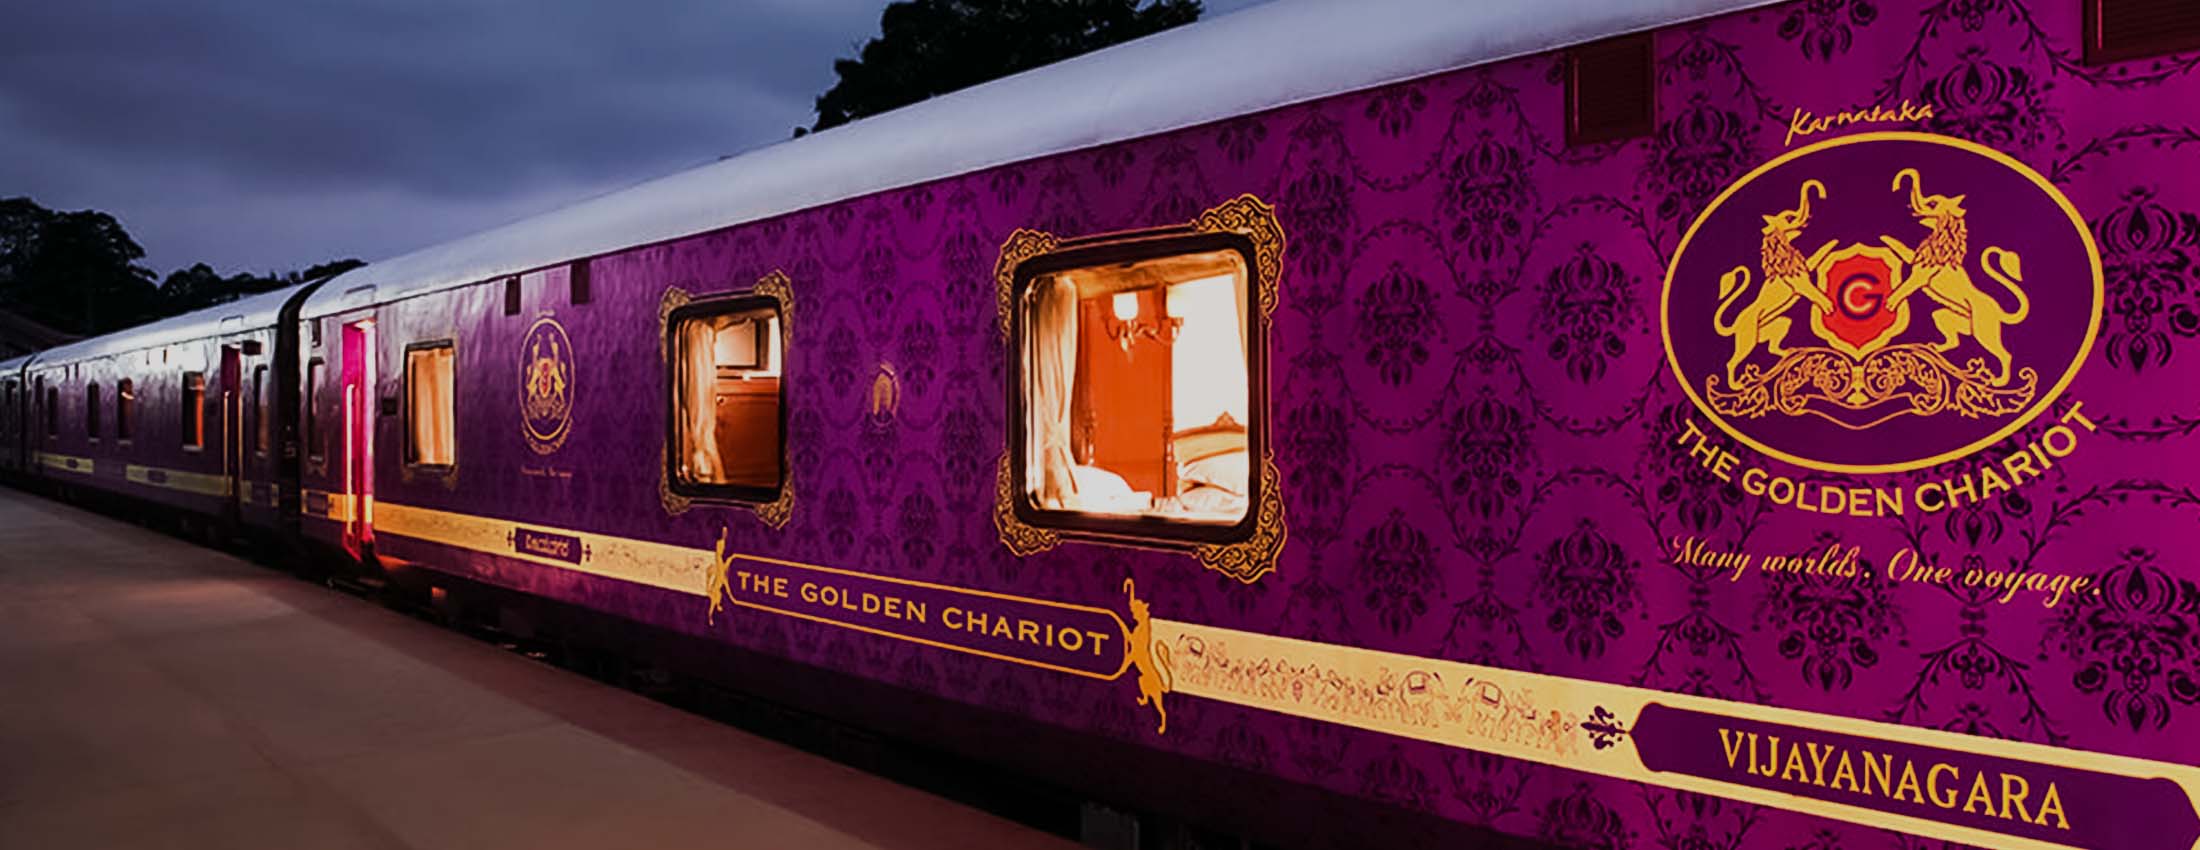 Golden Chariot- The only Luxury Train of South India | S_Buoyantfeet